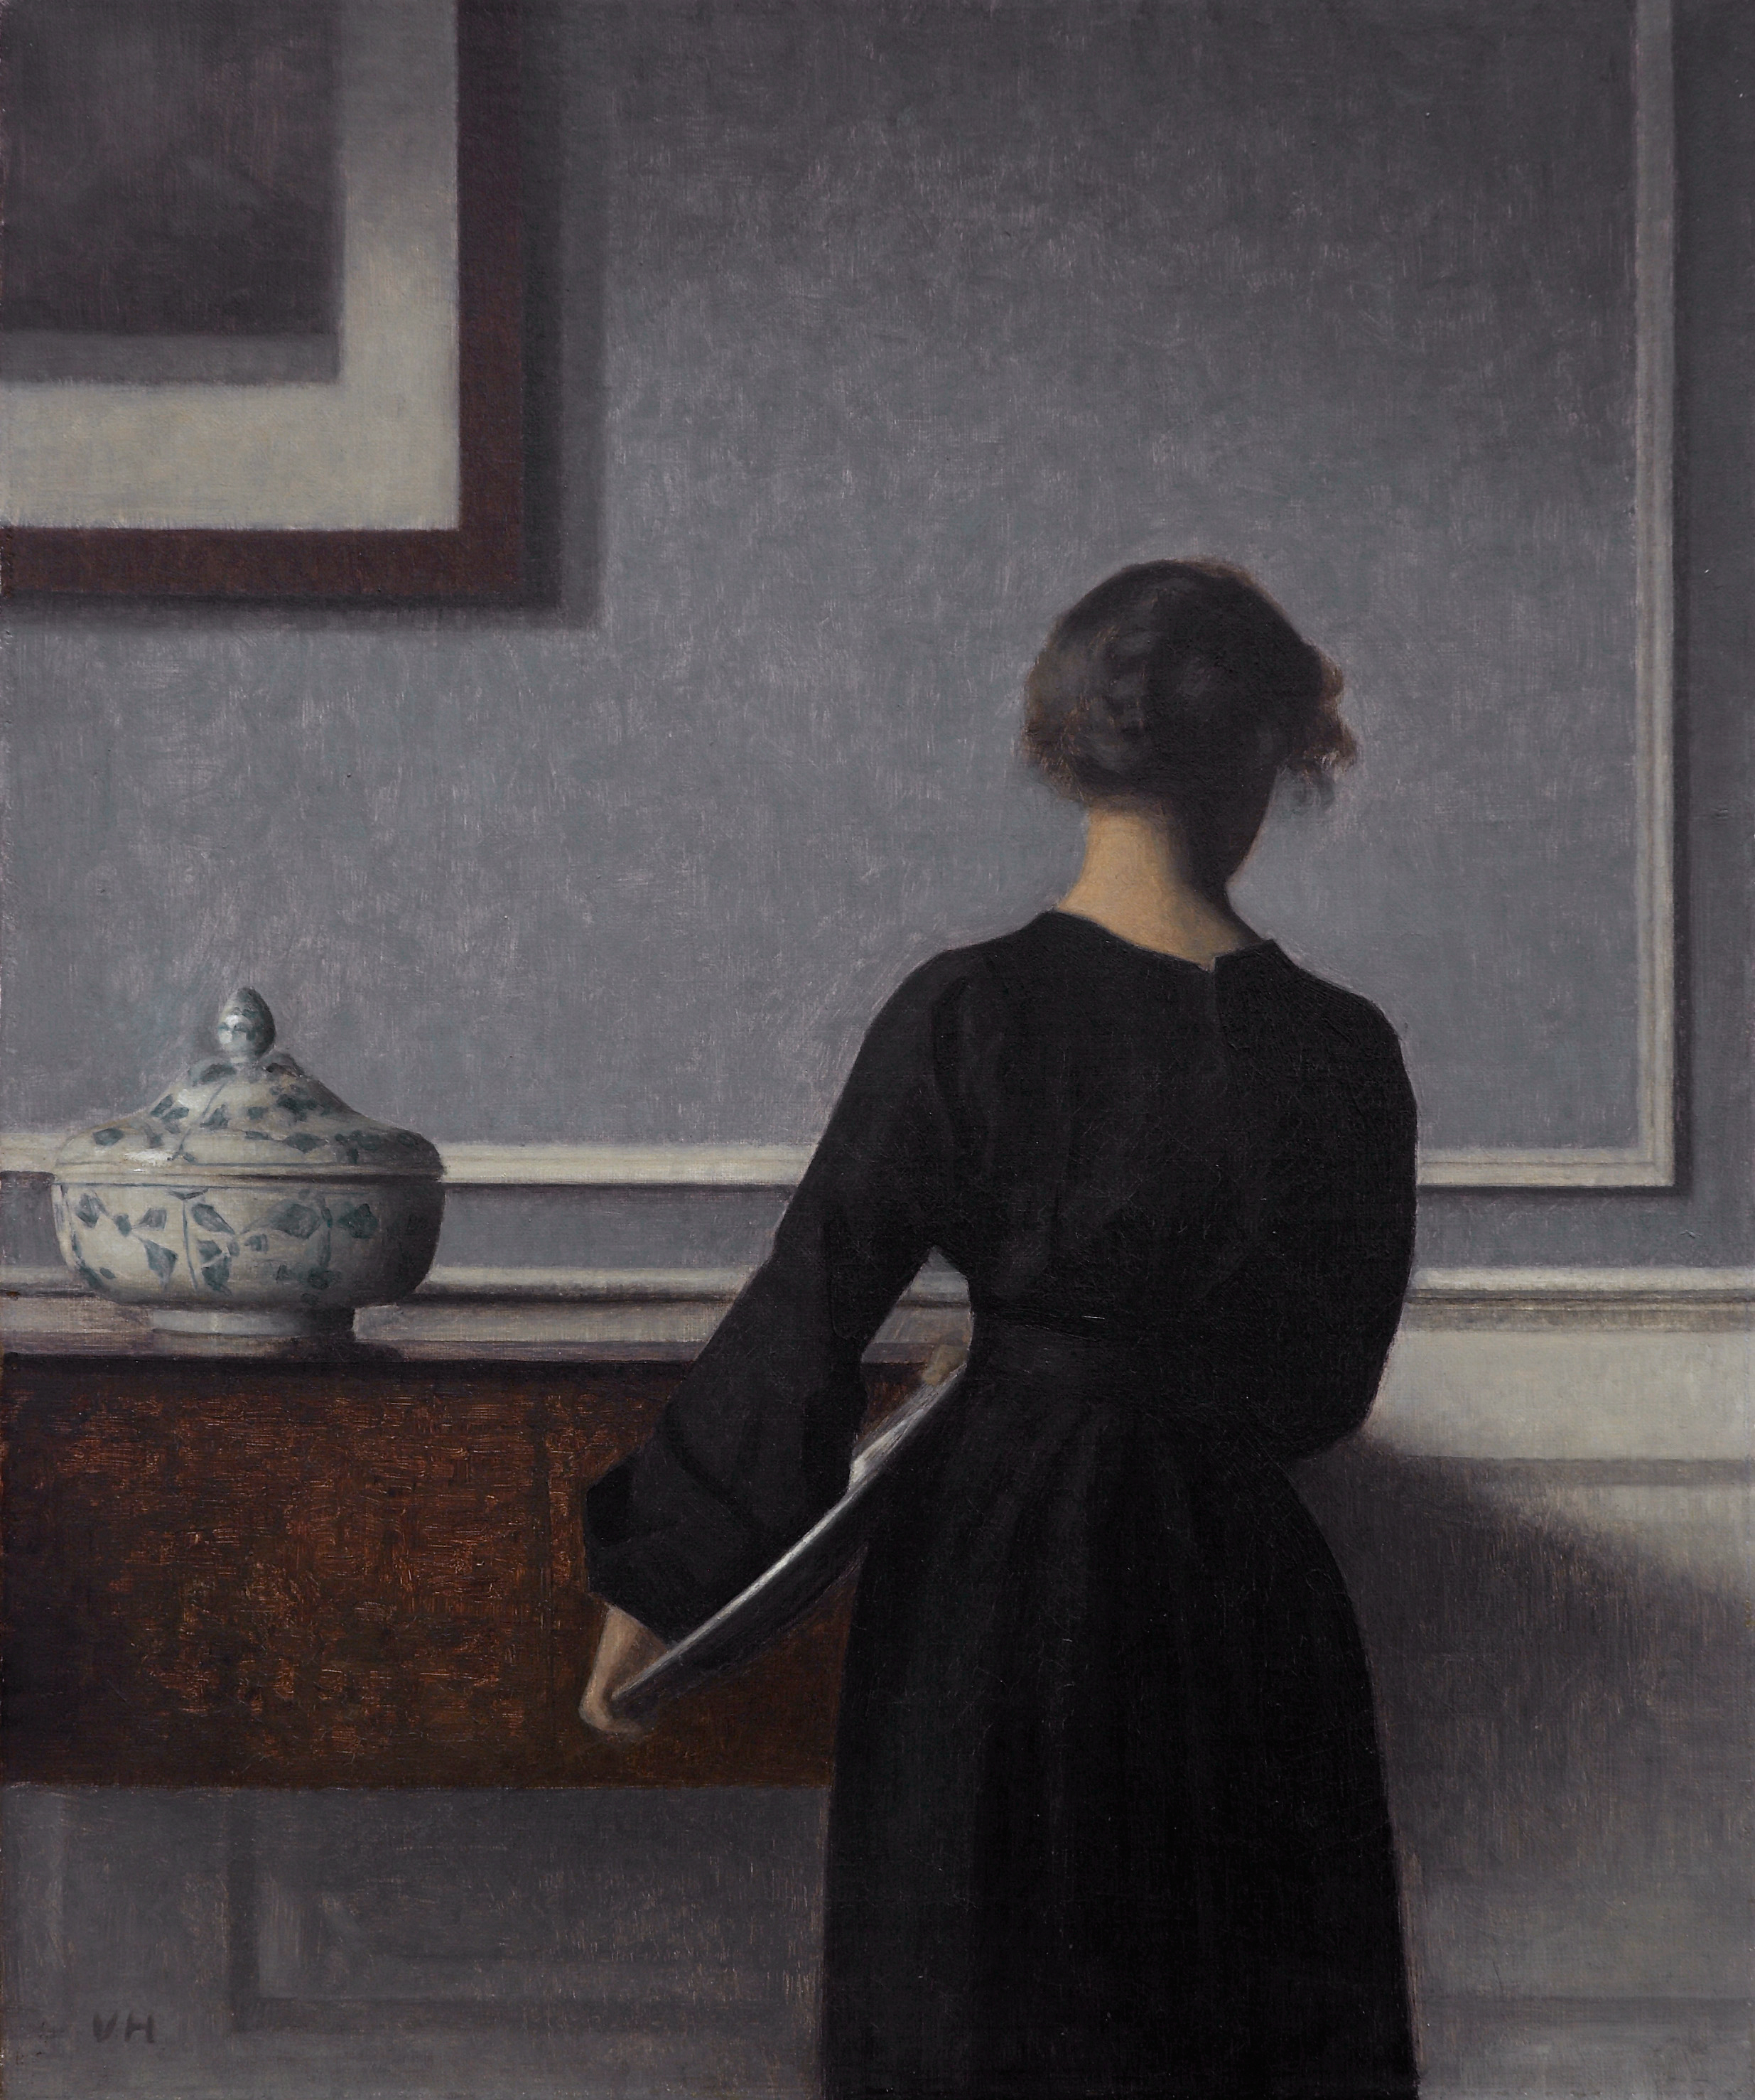 Interior with Young Woman from Behind by Vilhelm Hammershøi - c. 1904 - 50.5 x 60.5 cm Randers Museum of Art